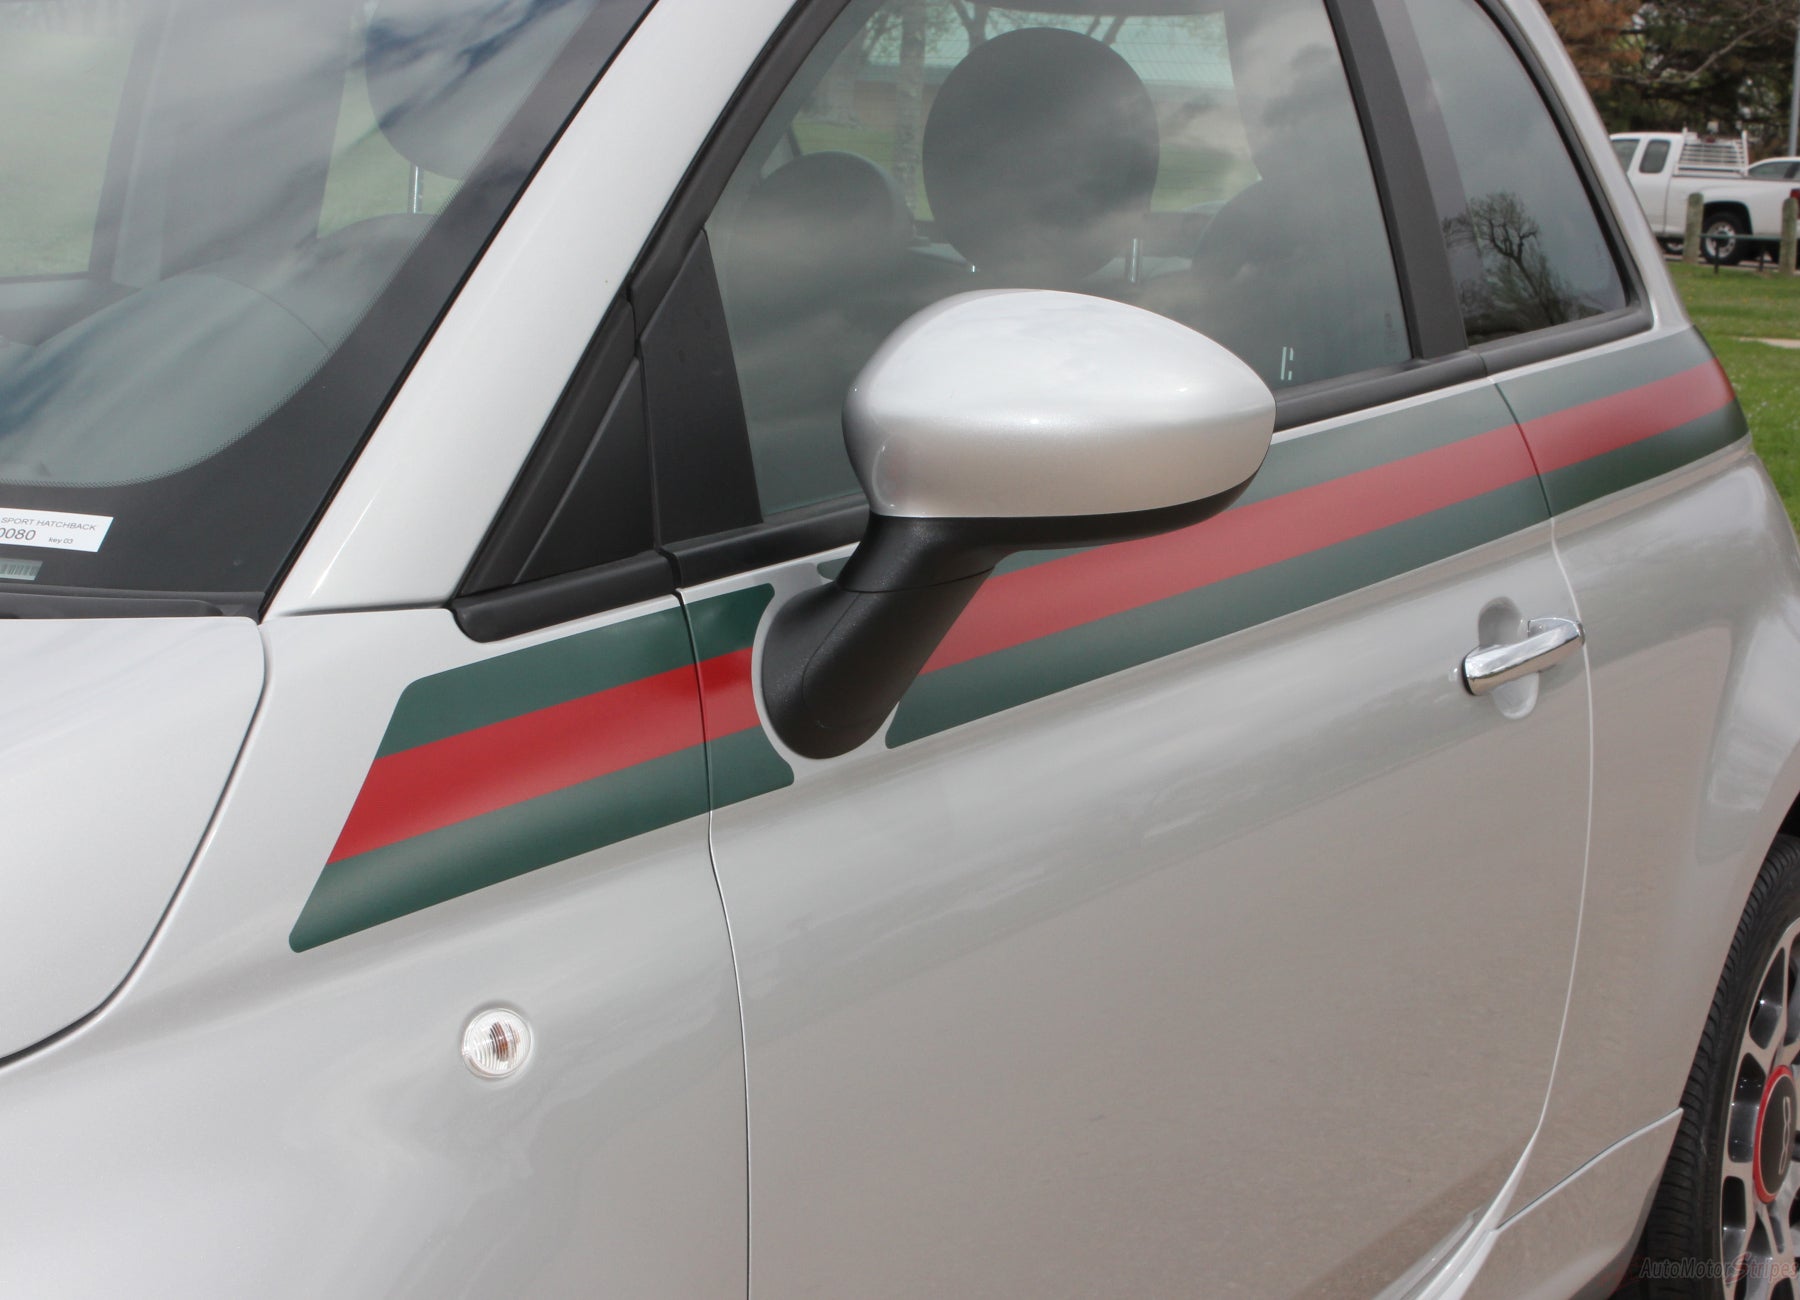 Monograph træner Kilde 2007-2018 Fiat 500 Italian Gucci Red Green Flag Upper Door Accent Stri |  Auto Motor Stripes Decals Vinyl Graphics and 3M Striping Kits